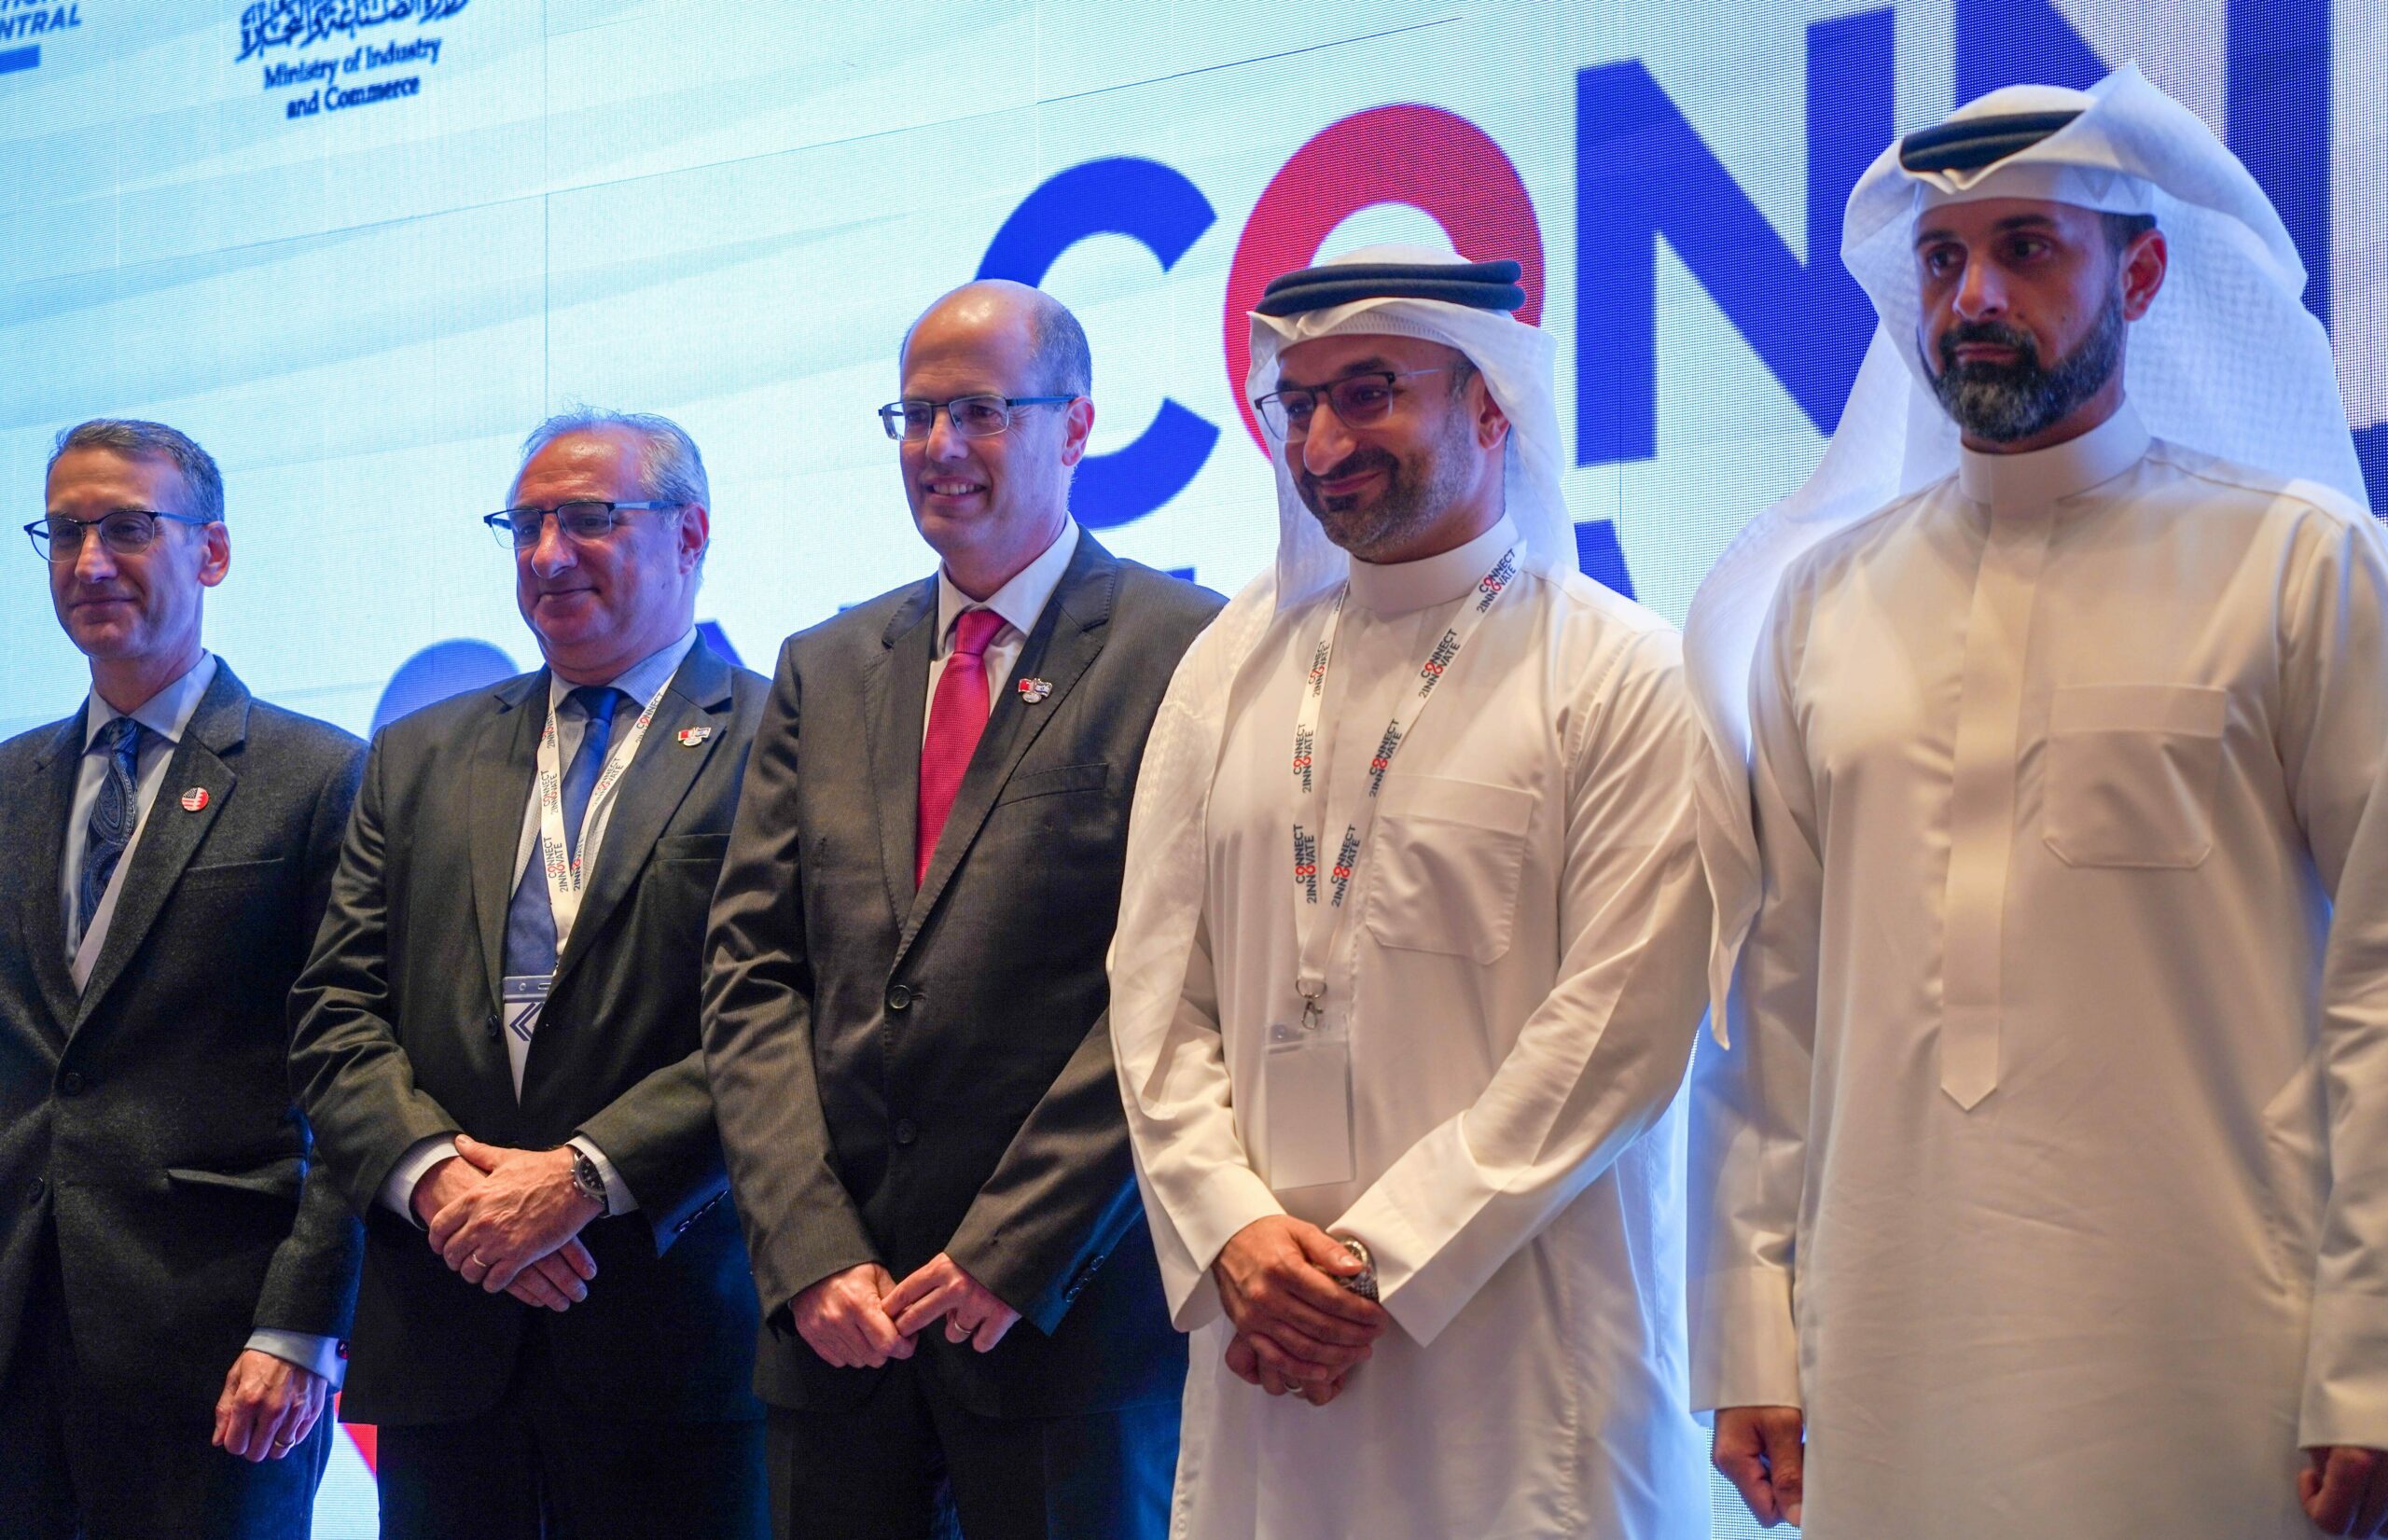 More Than 500 Bahraini & Israeli Business Leaders Attended “Connect2Innovate” Conference